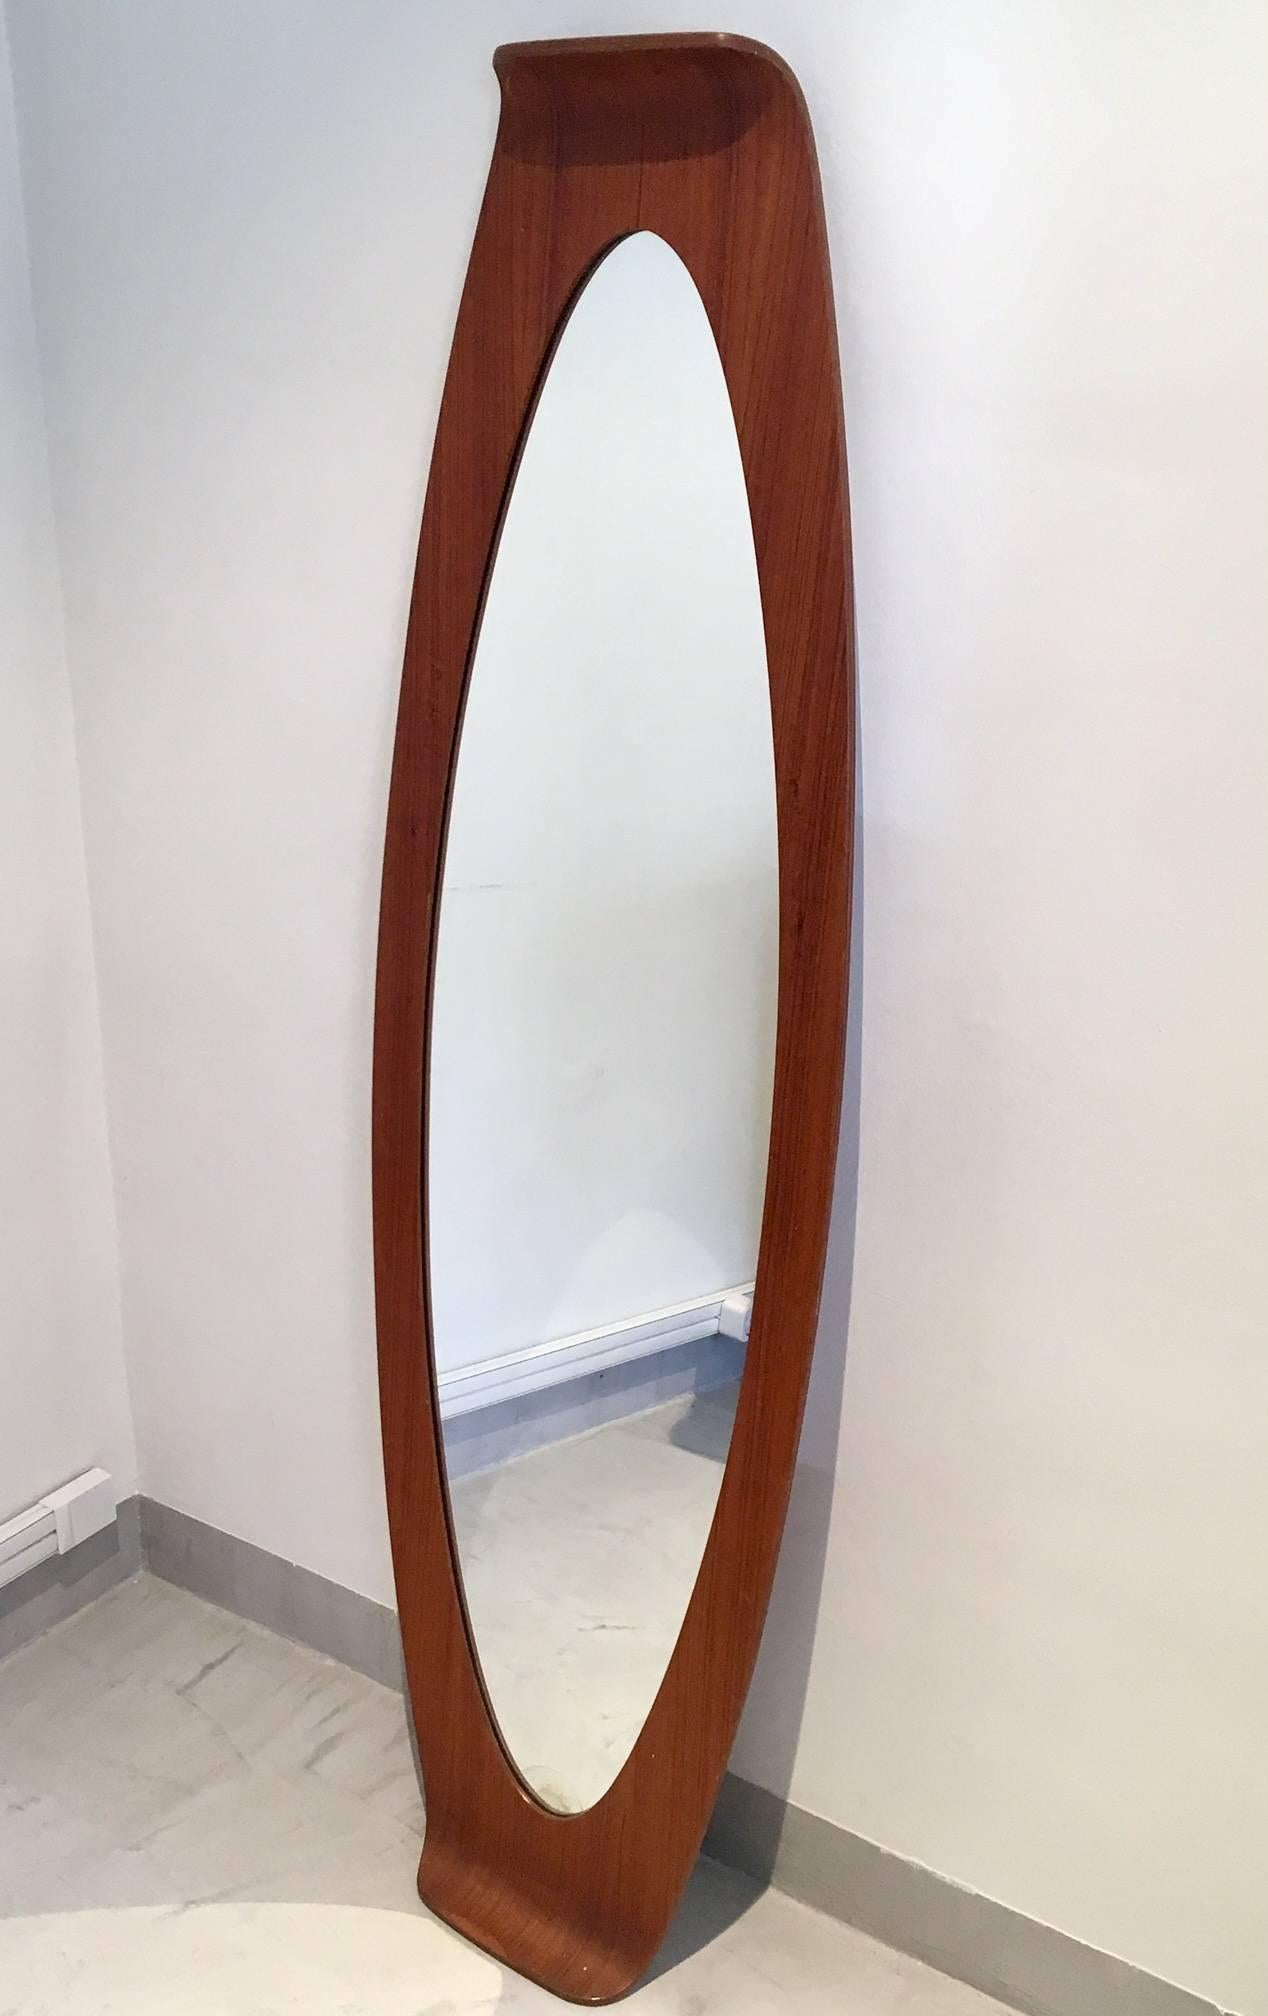 Large oval mirror from the 1960s designed by Franco Campo & Carlo Graffi for Home, Italy. Bent plywood frame. 
Slight discoloration on the bottom of the mirrored glass and minor stains on the frame.